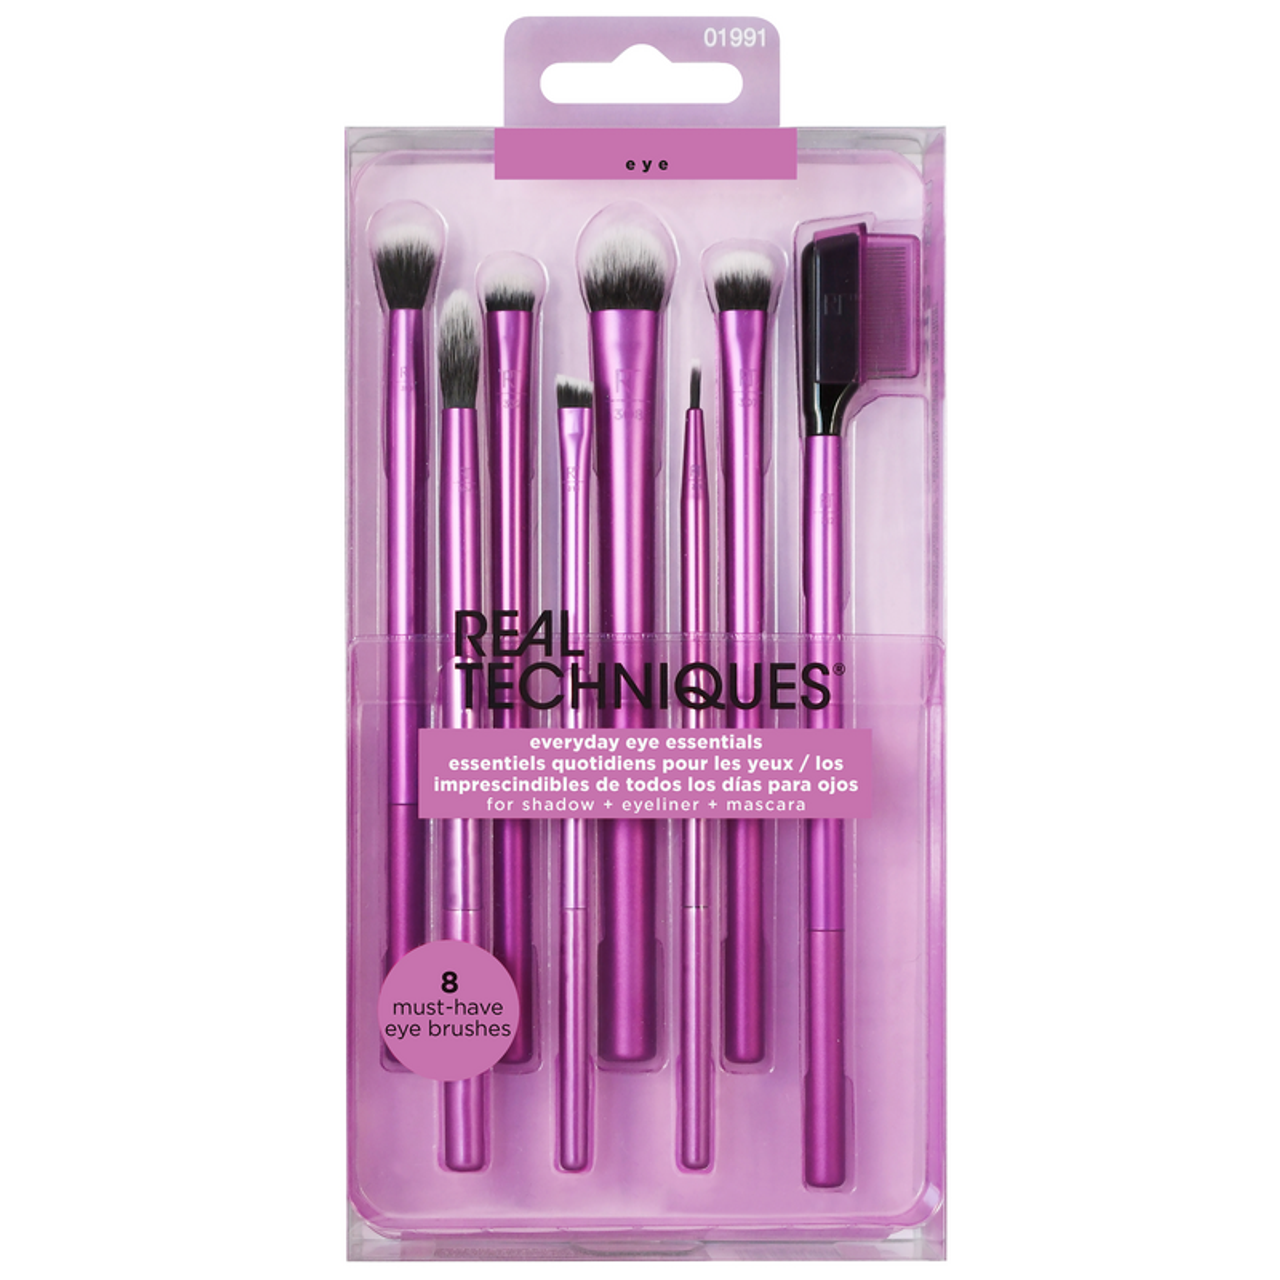 REAL TECHNIQUES 8 EYE BRUSHES FOR SHADOW + EYELINER + MASCARA